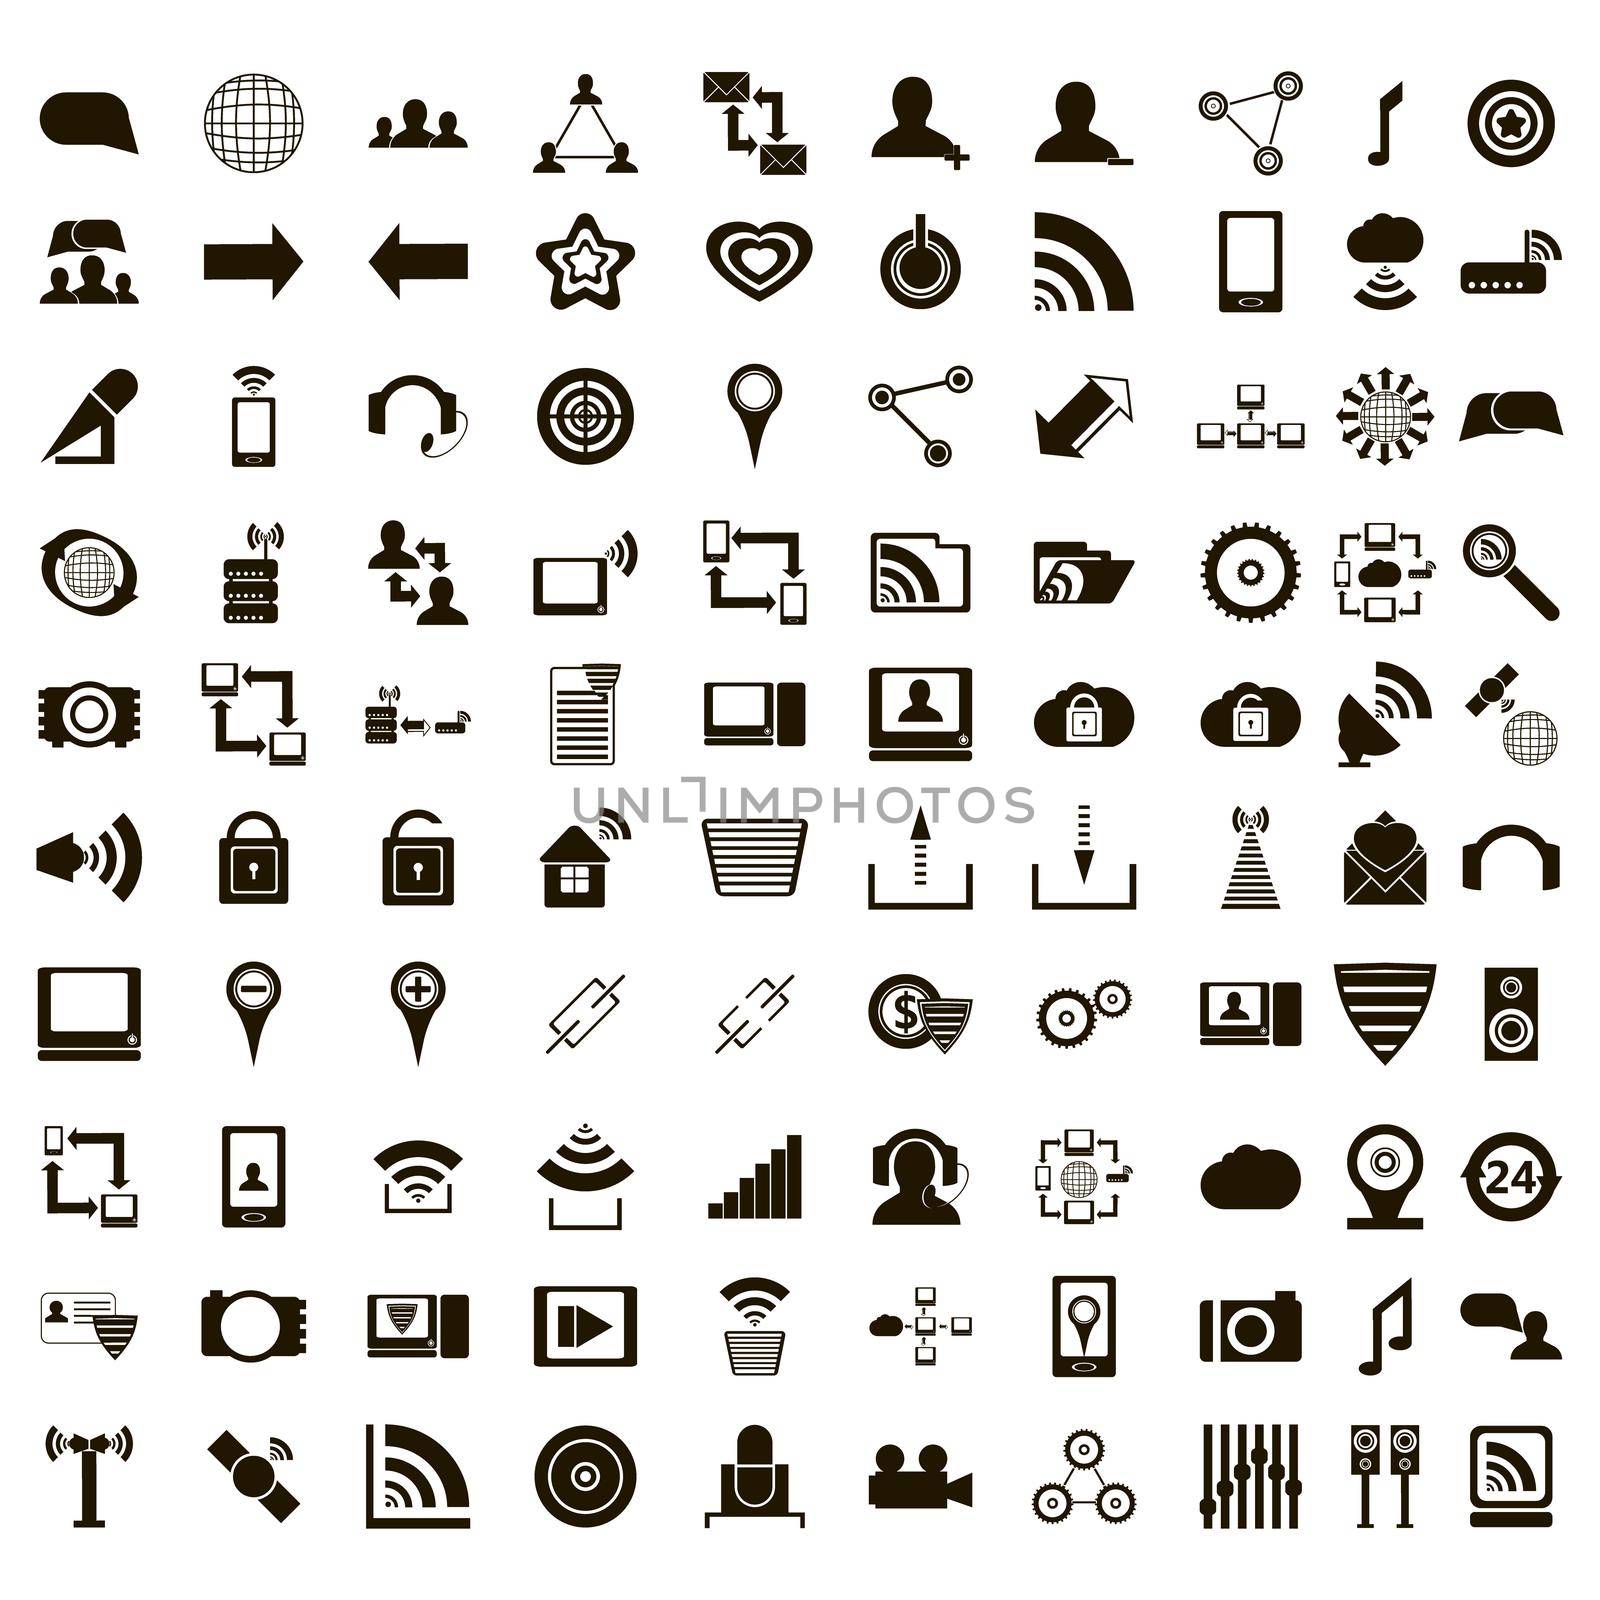 100 office icons set, simple style by ylivdesign